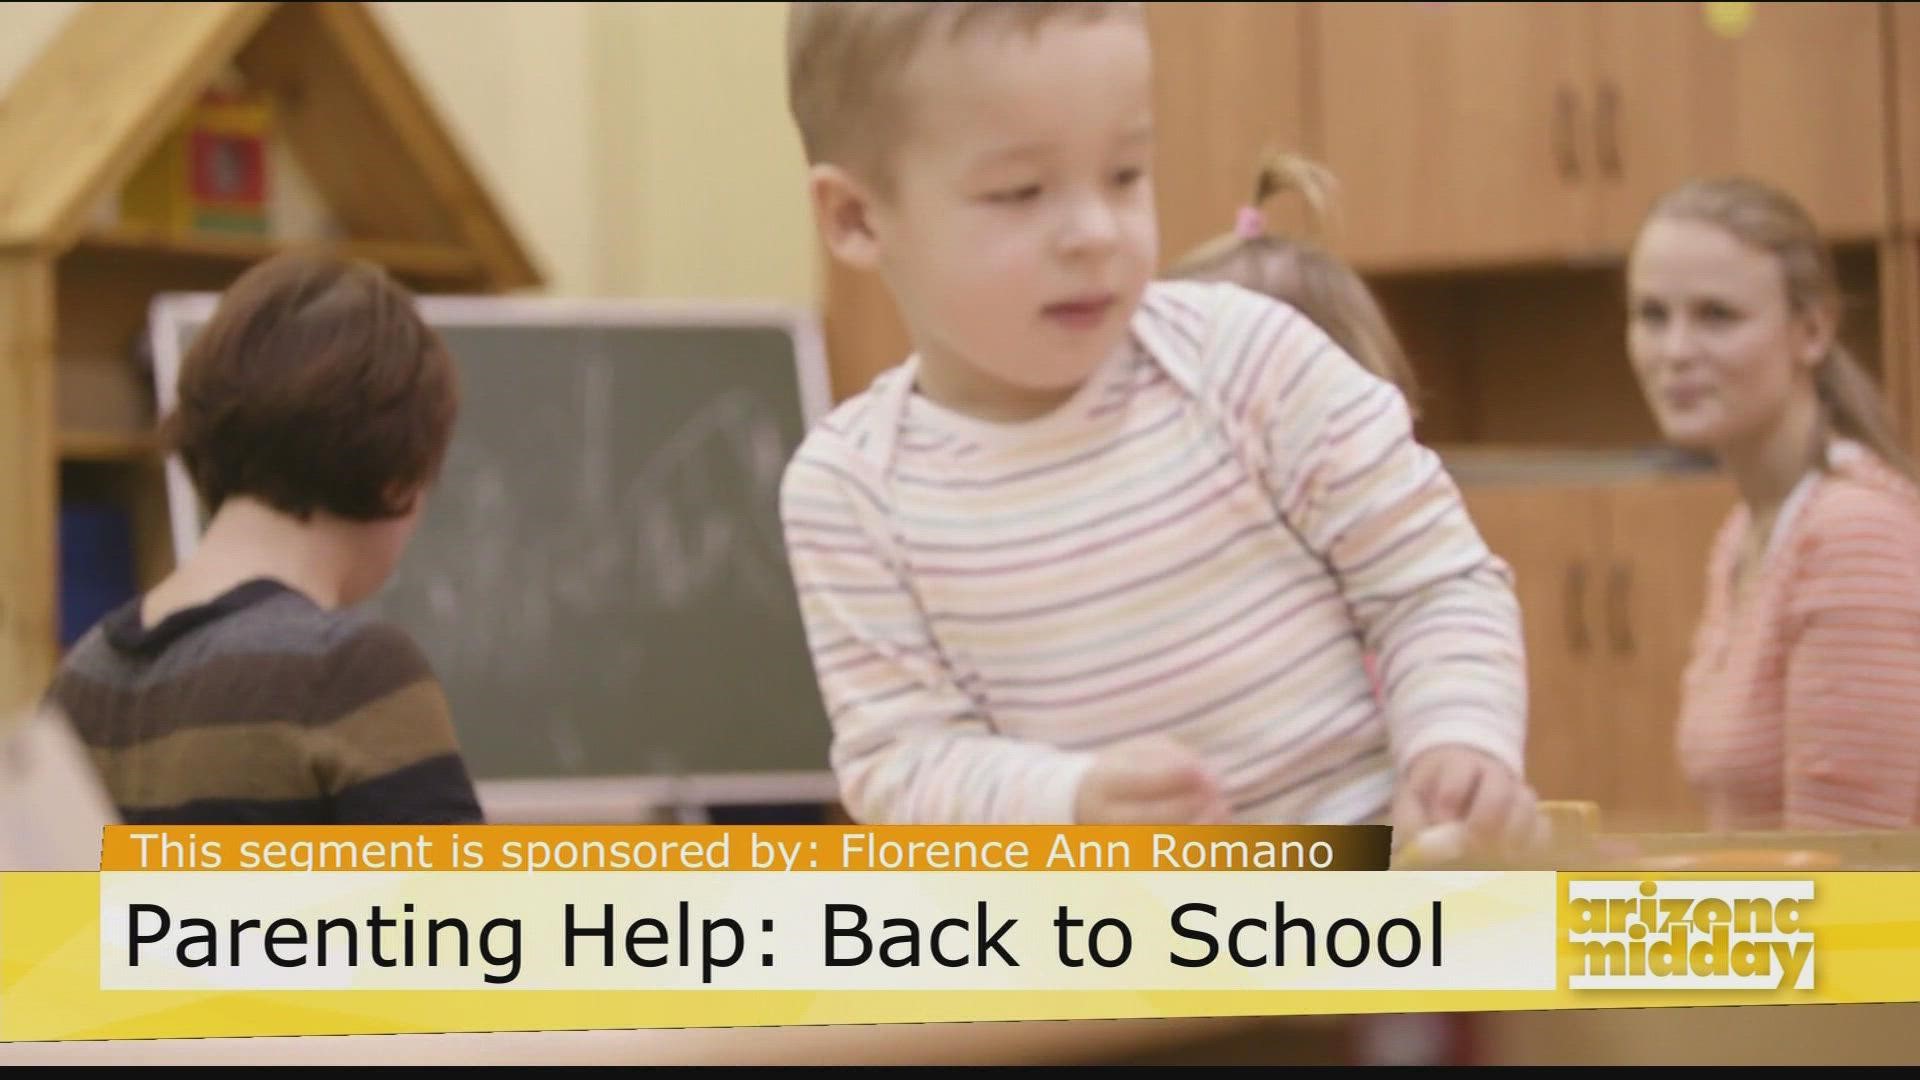 Florence Ann Romano, The Windy City Nanny & Childcare Expert, shares how to help ease the kids back into school